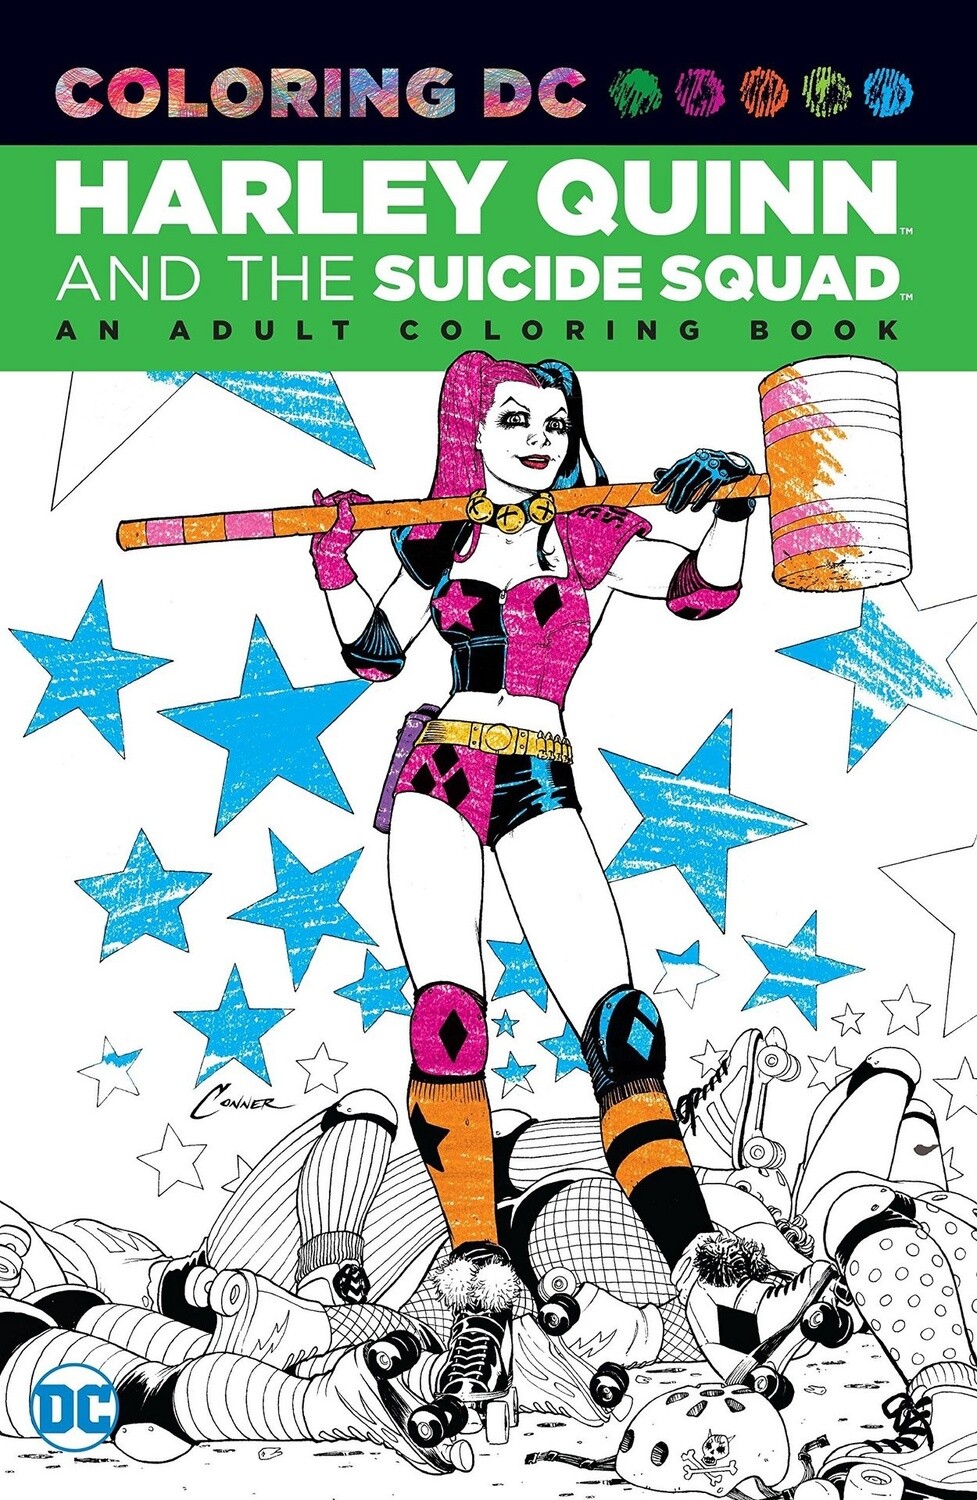 Harley Quinn and the Suicide Squad and Adult Coloring Book